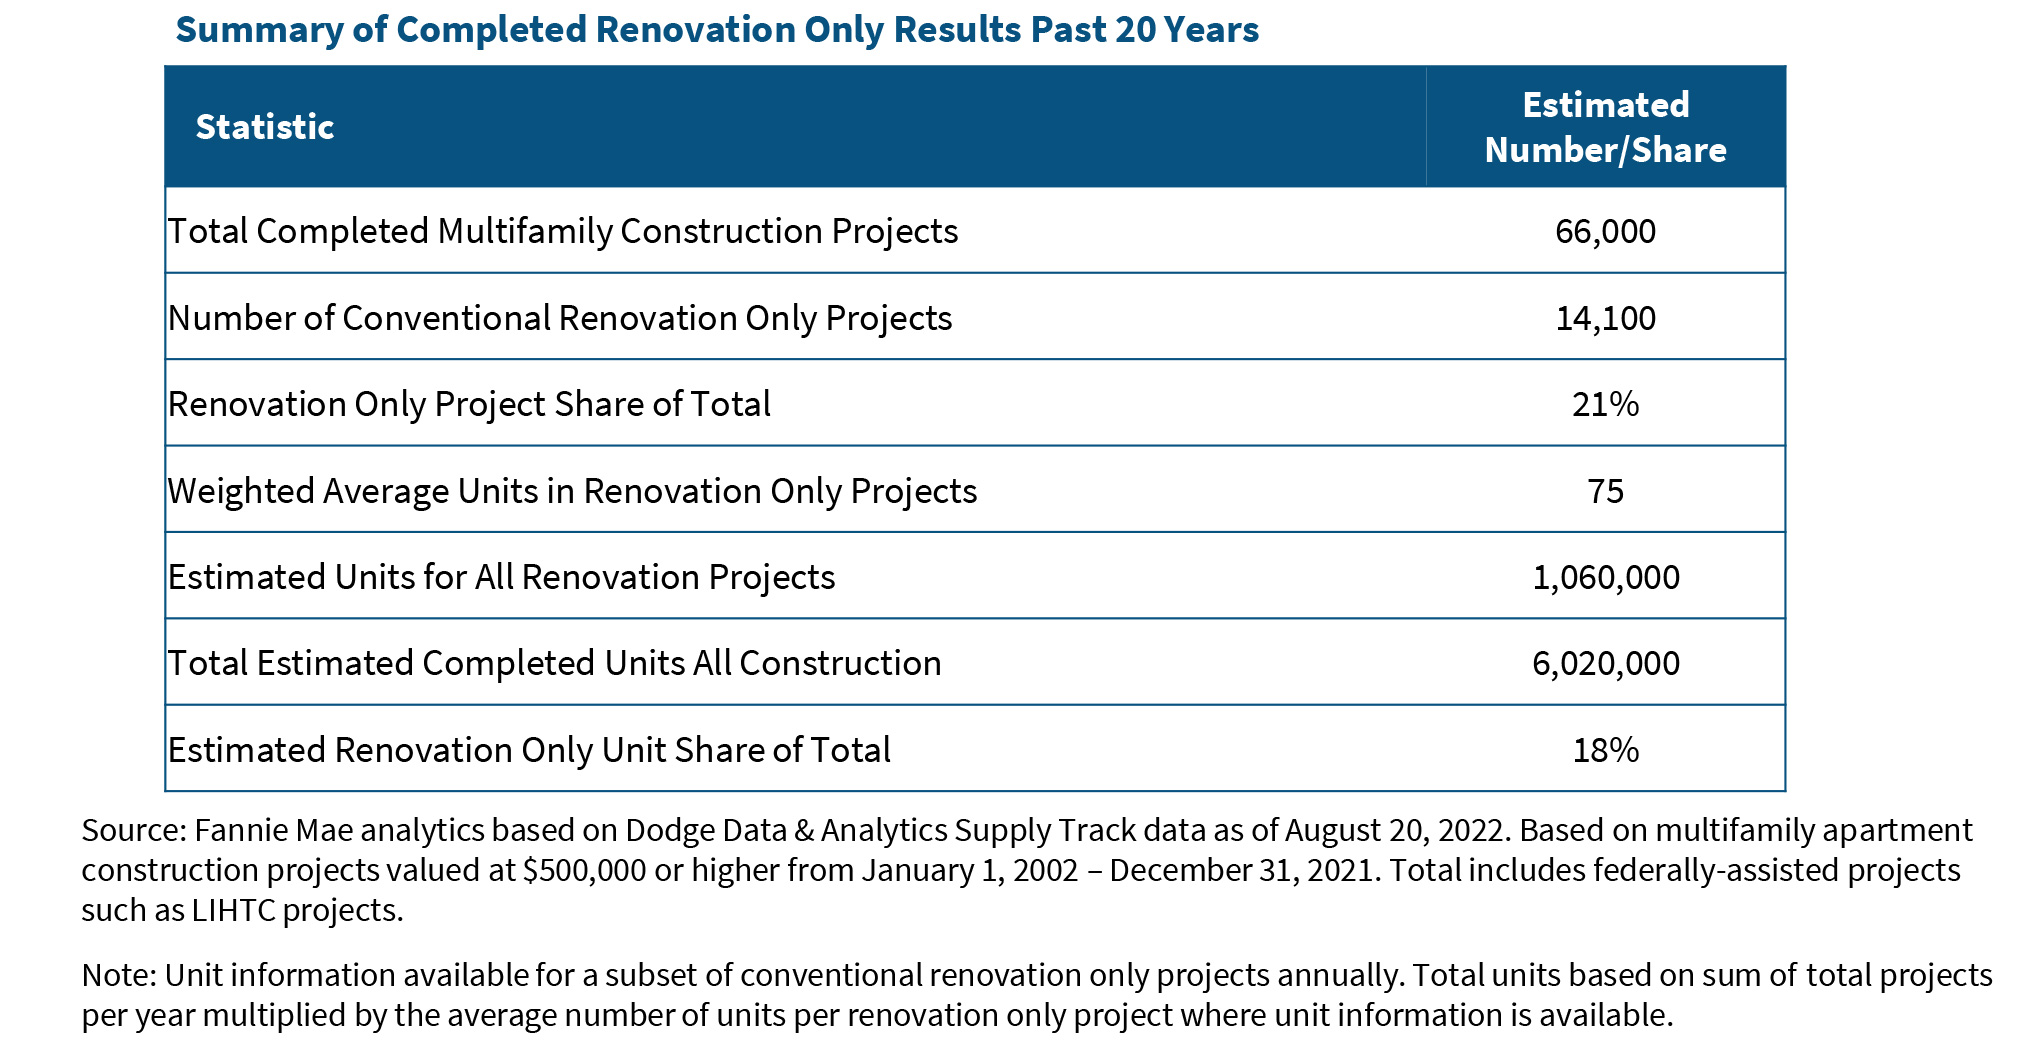 Summary of Completed Renovation Only Results Past 20 Years